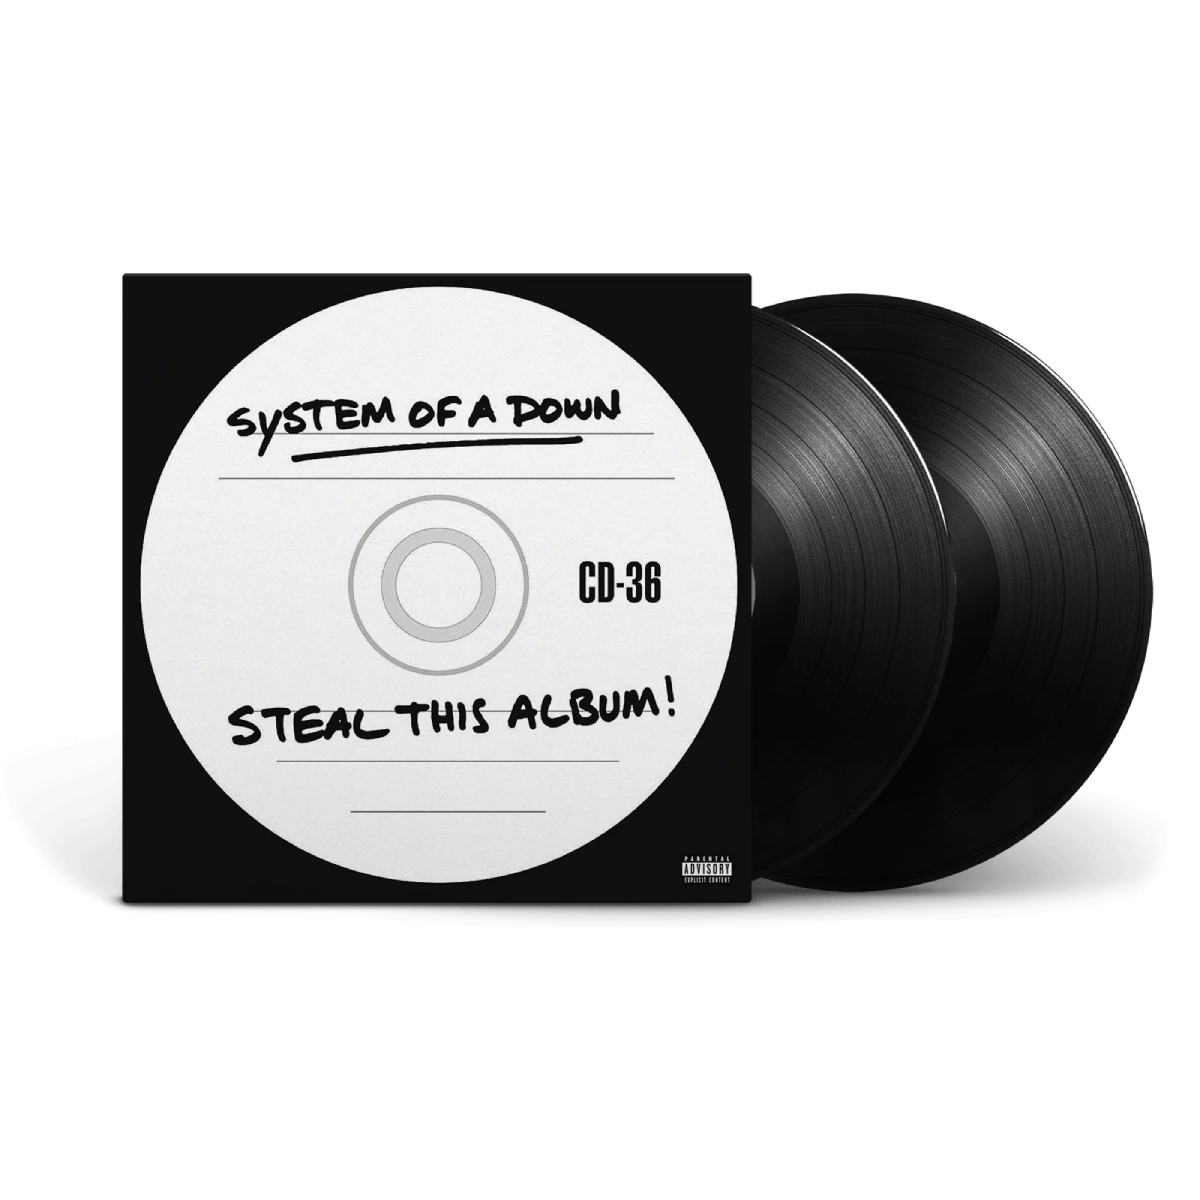 System Of A Down - Steal This Album! Vinyl LP